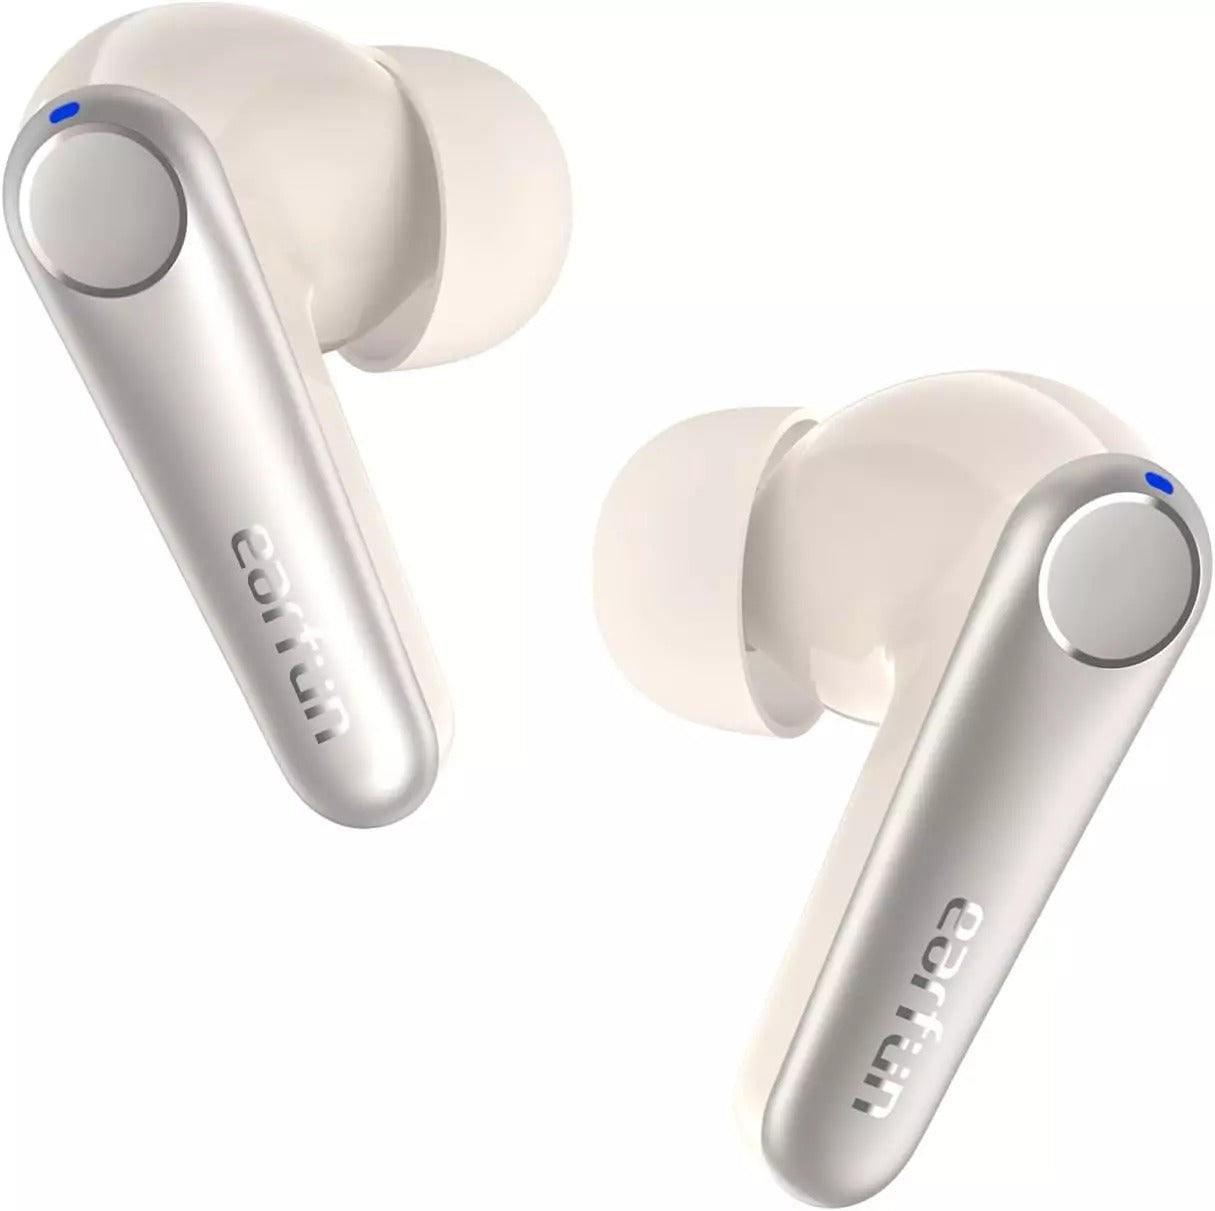 EarFun Air Pro 3 Noise Cancelling Earbuds Price in Pakistan